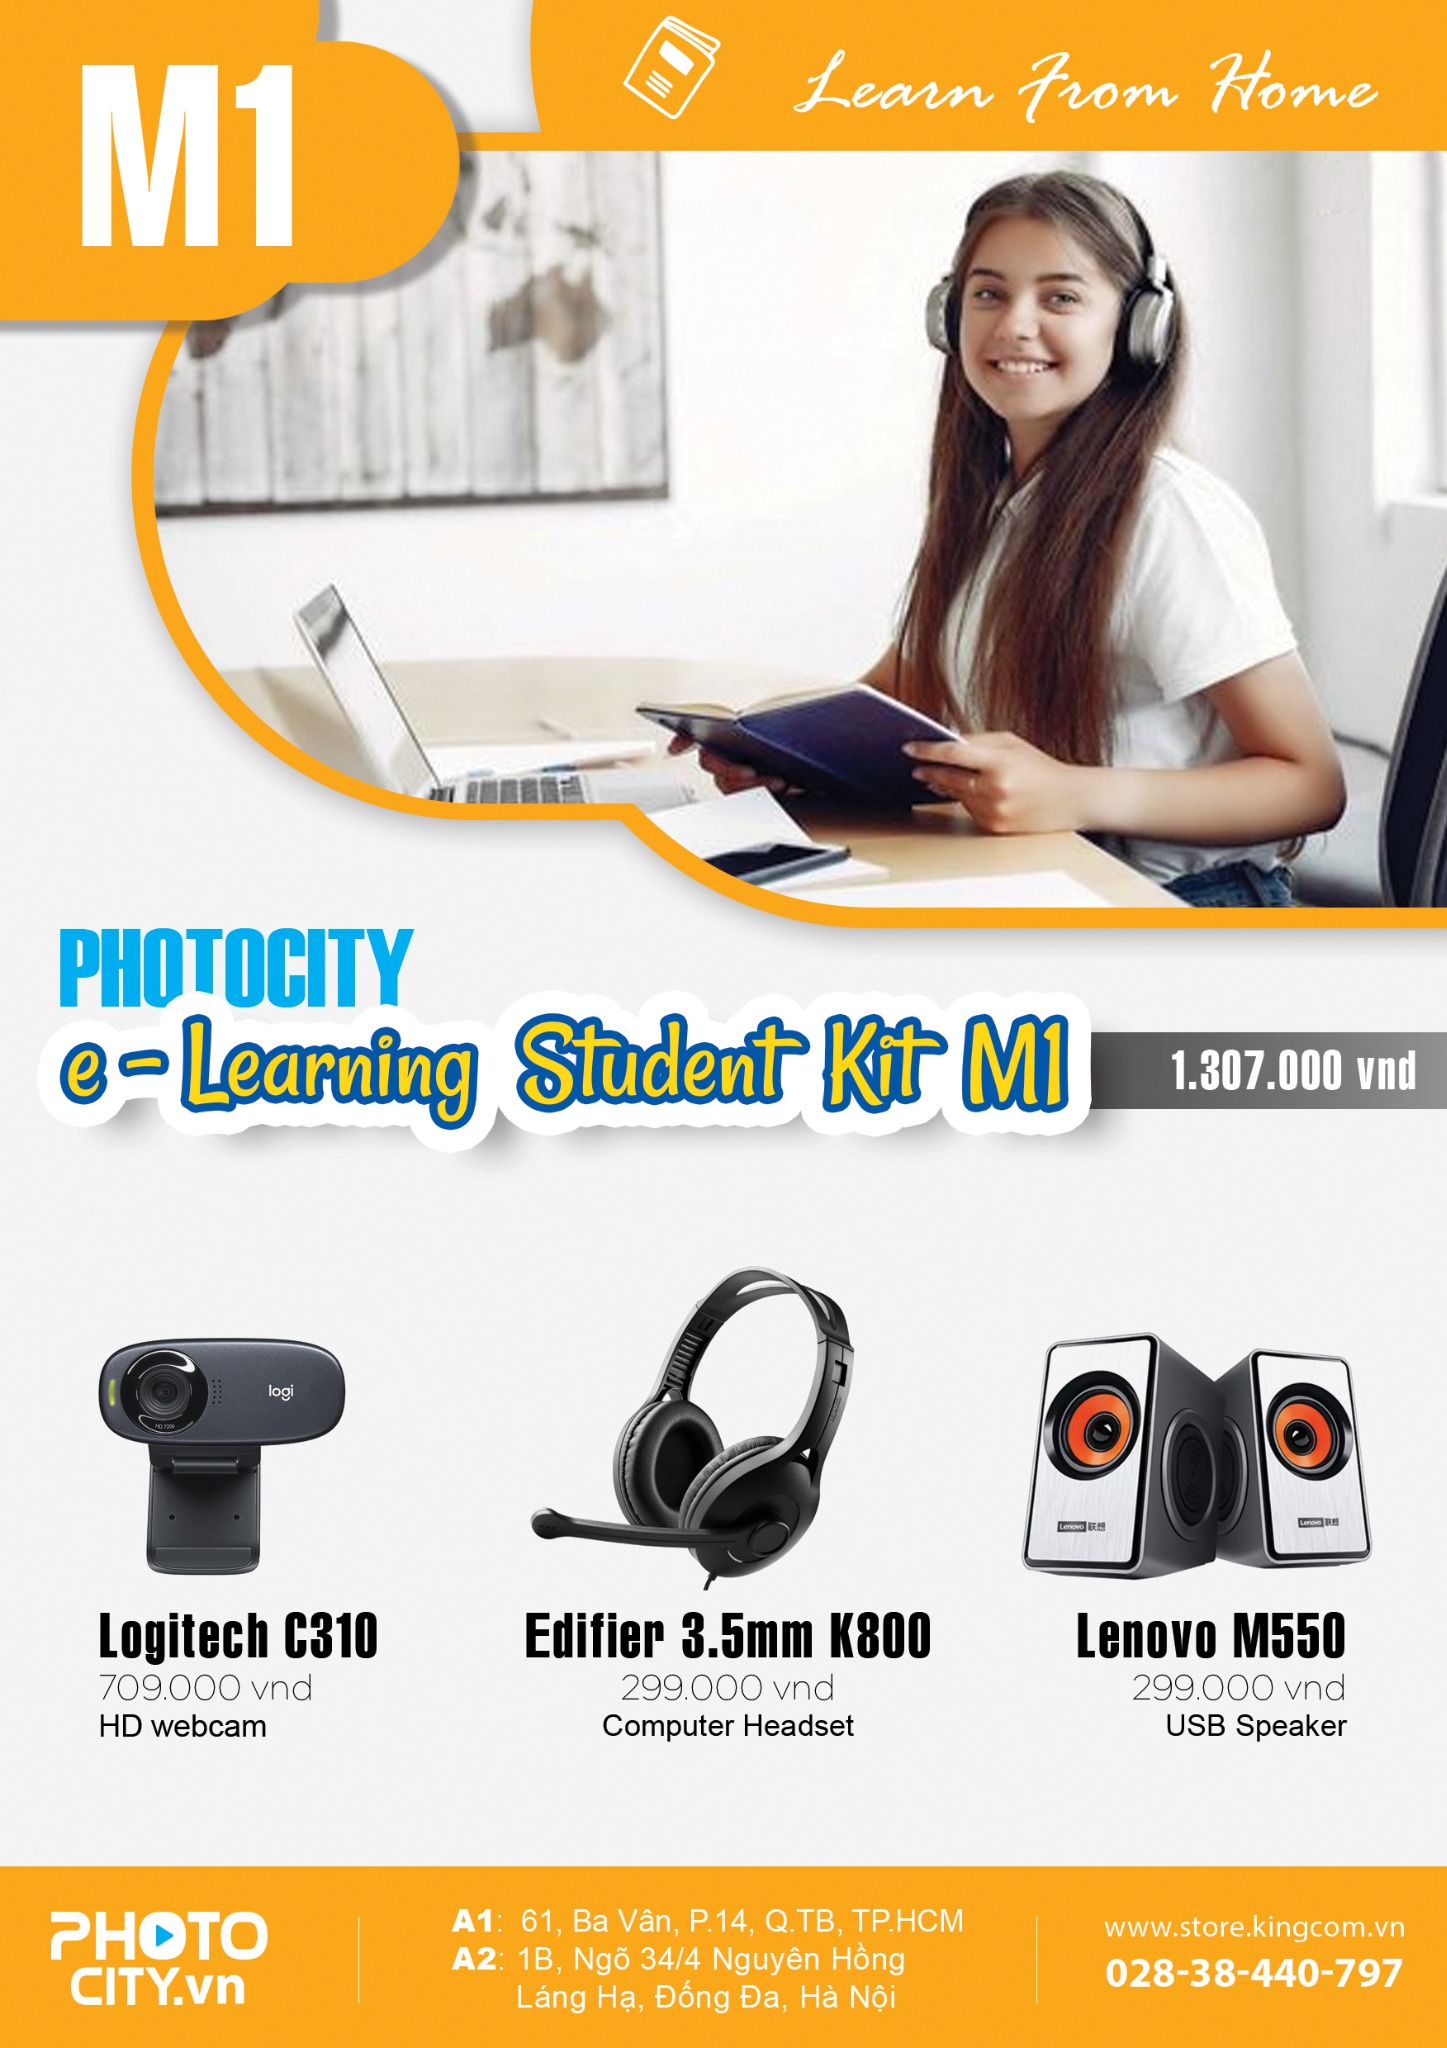 PhotoCity e -learning Student Kit M1 (Bộ dụng cụ học online)